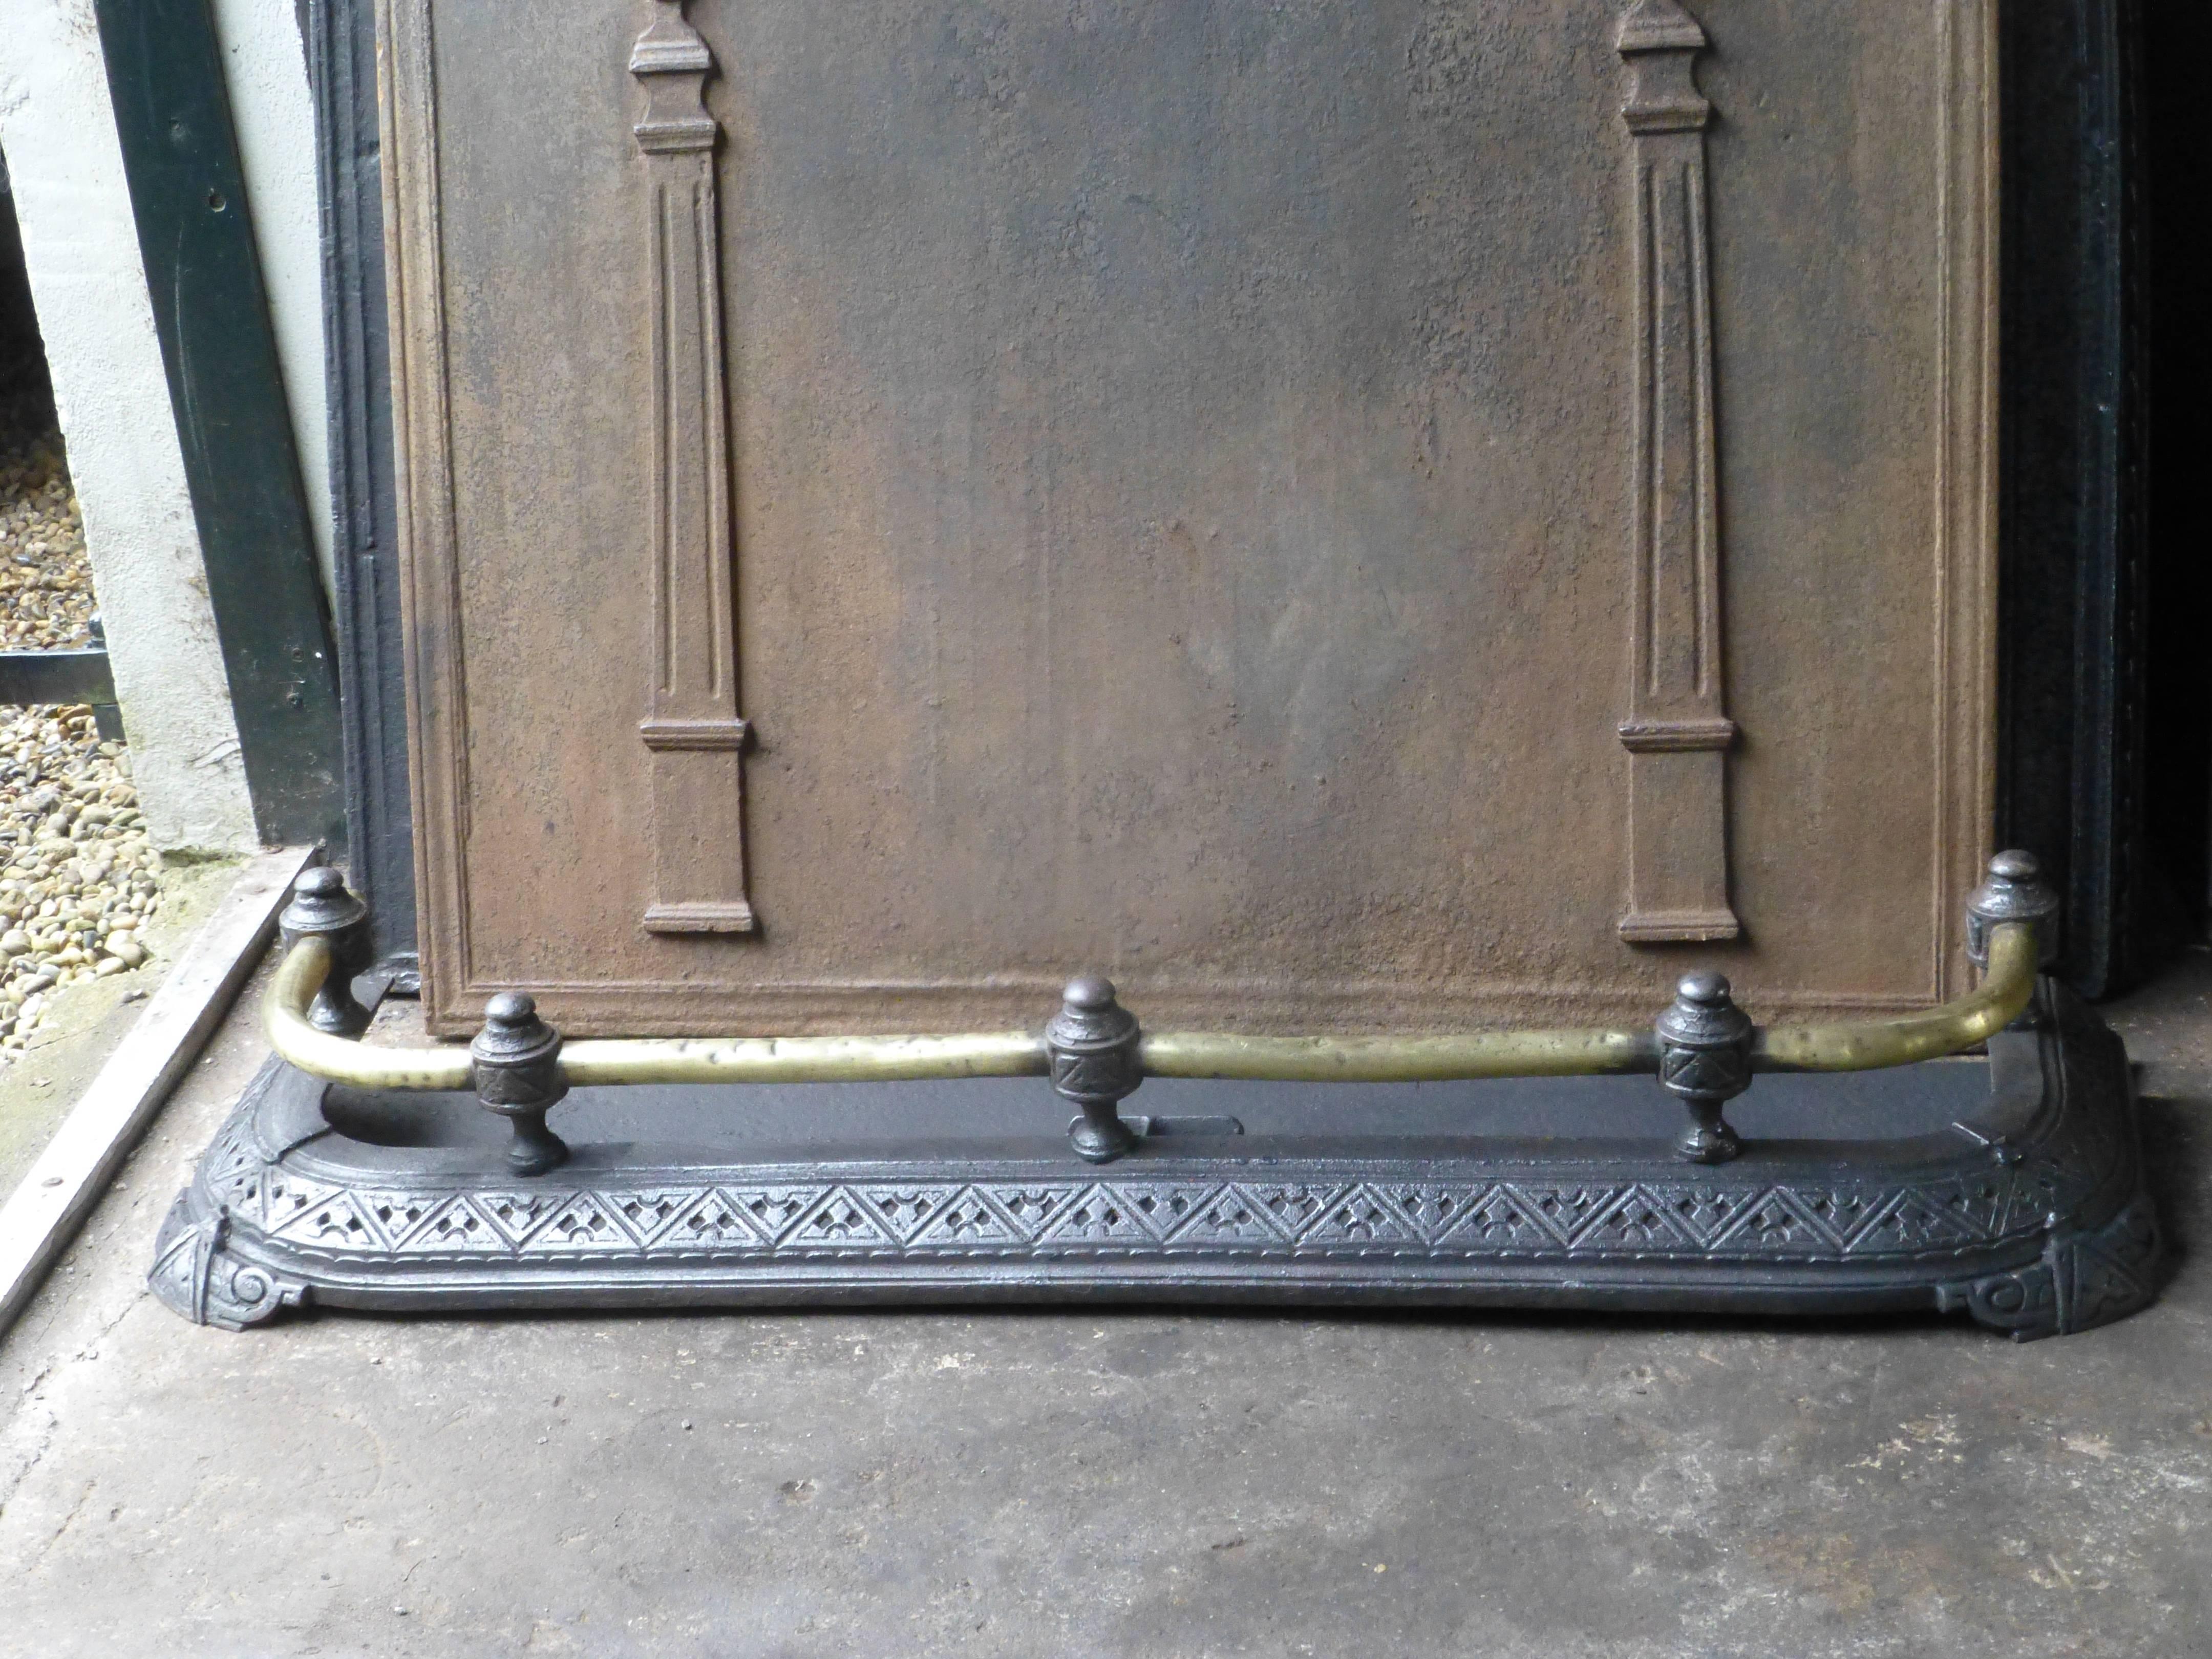 19th century English fire fender - fireplace screen made of brass and cast iron. Victorian period. The condition is good.